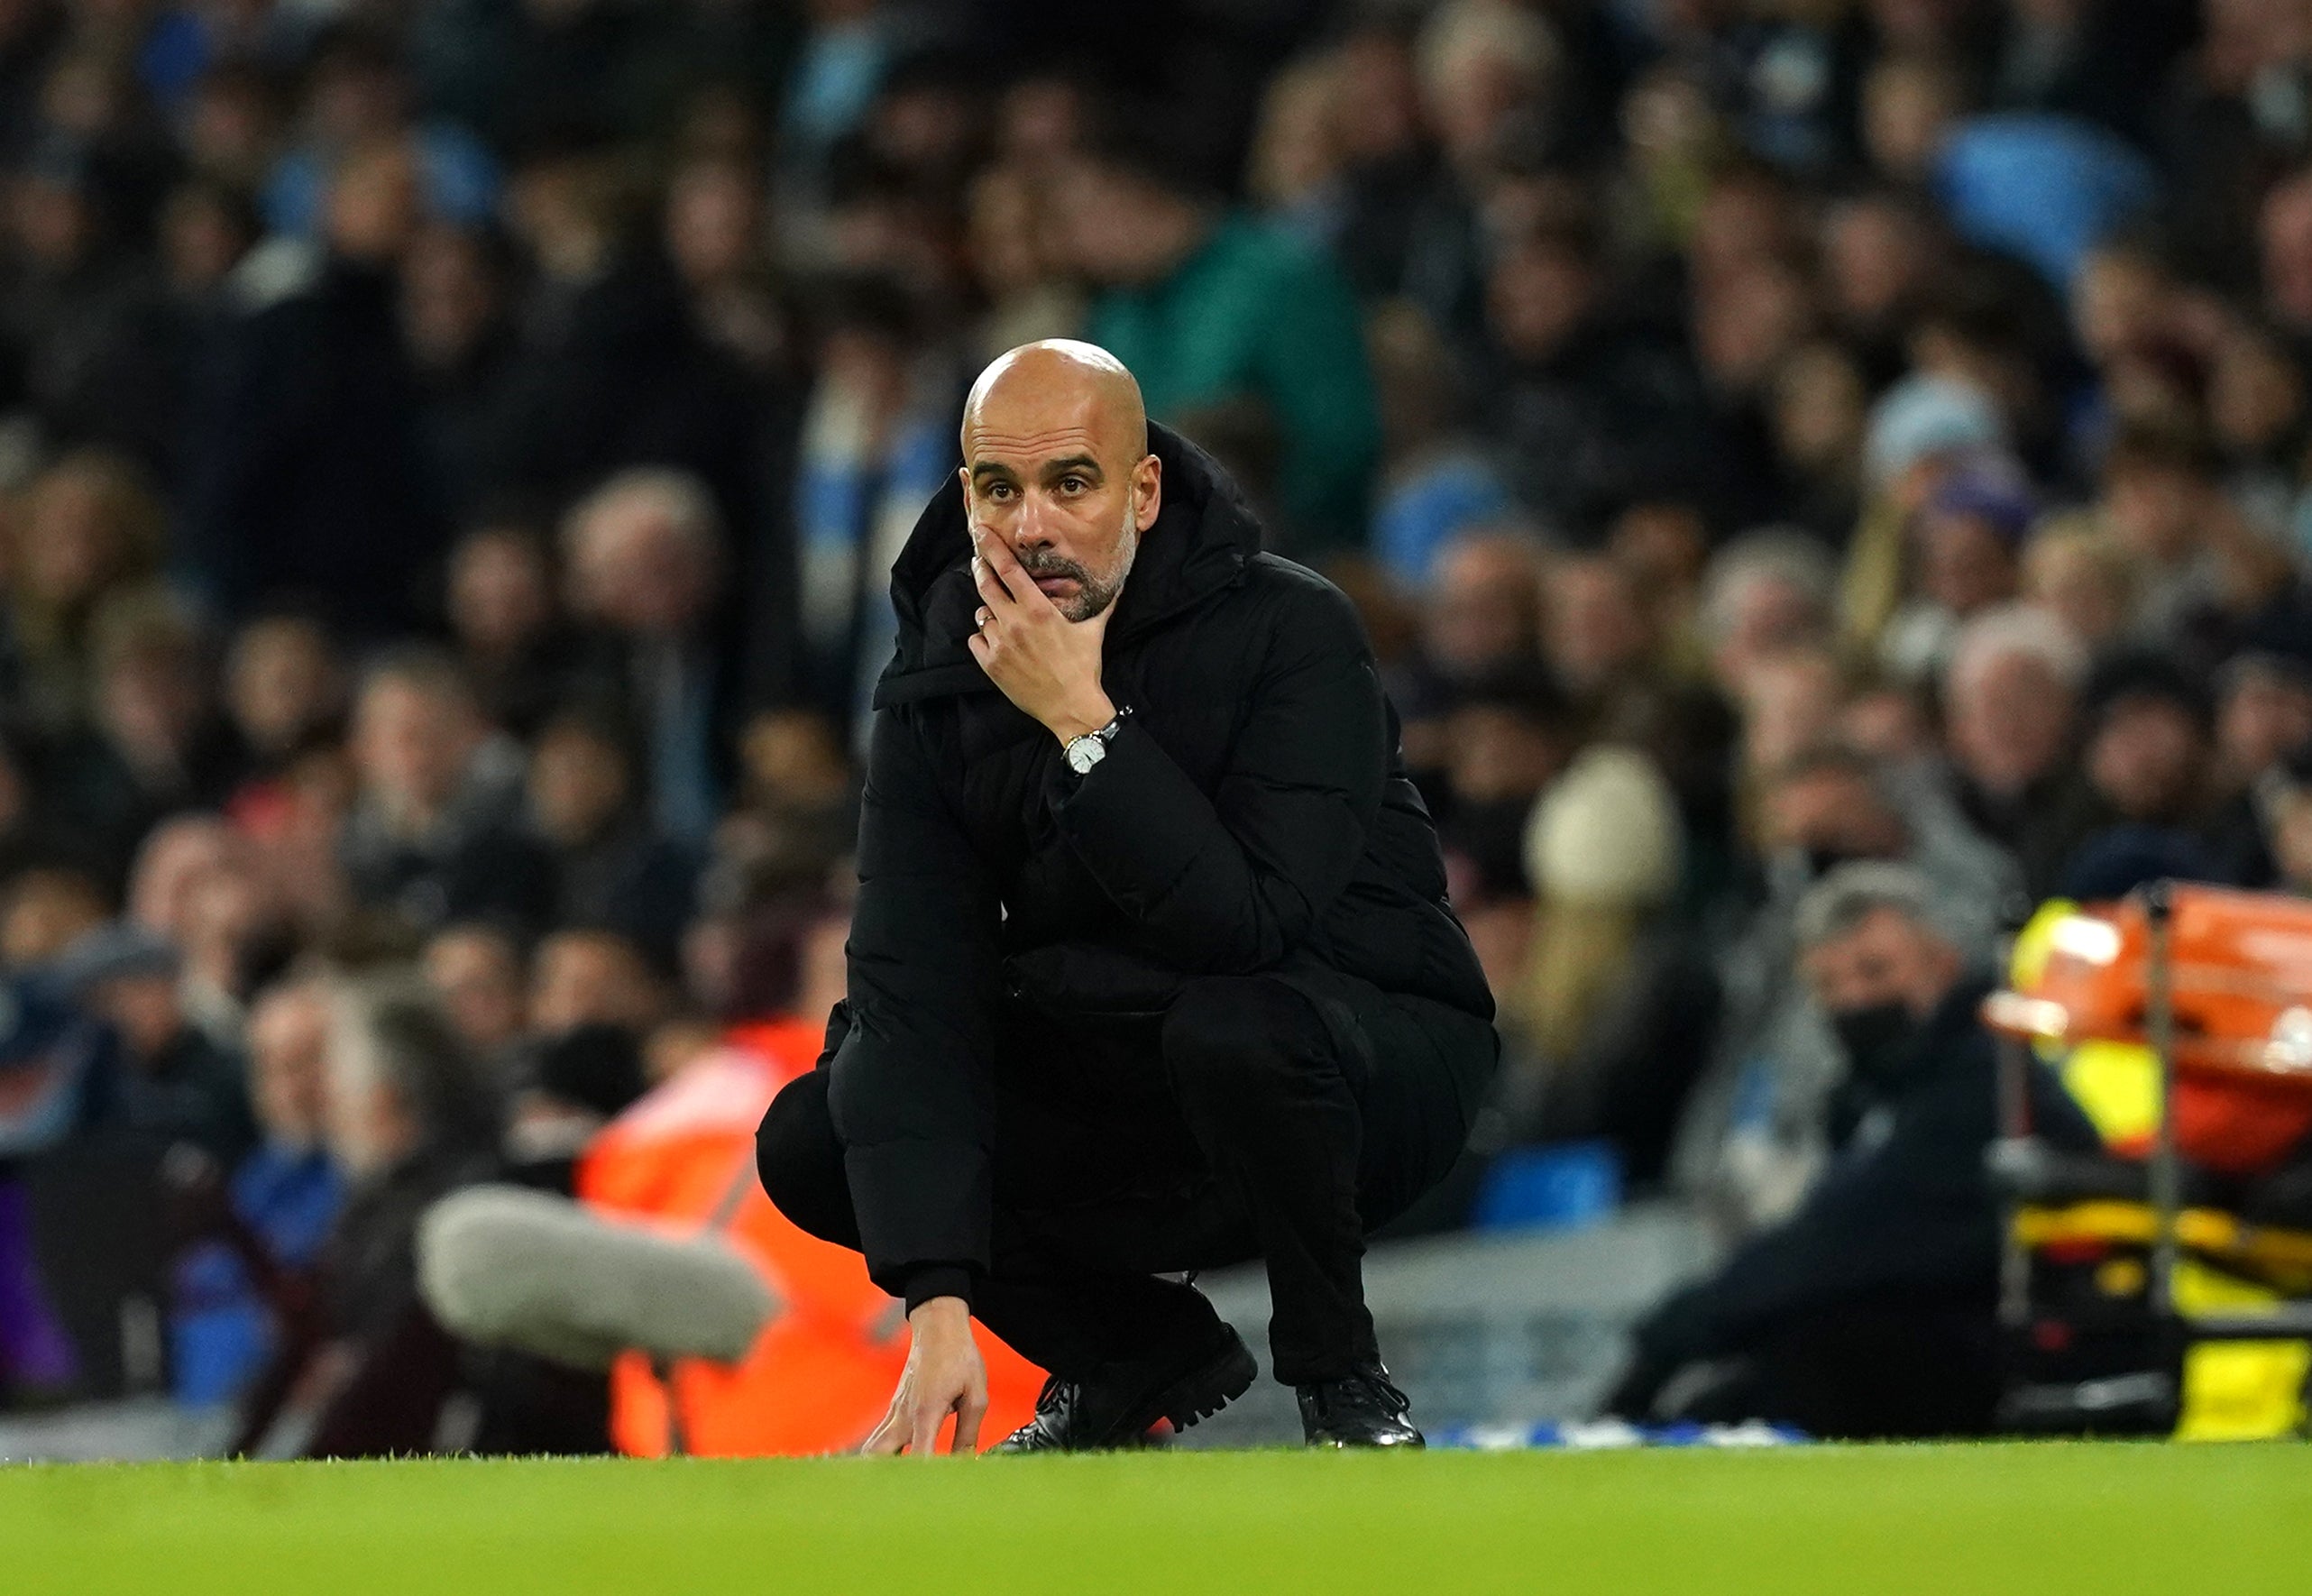 Pep Guardiola understands players’ welfare concerns but does not think a strike is likely (Martin Rickett/PA)